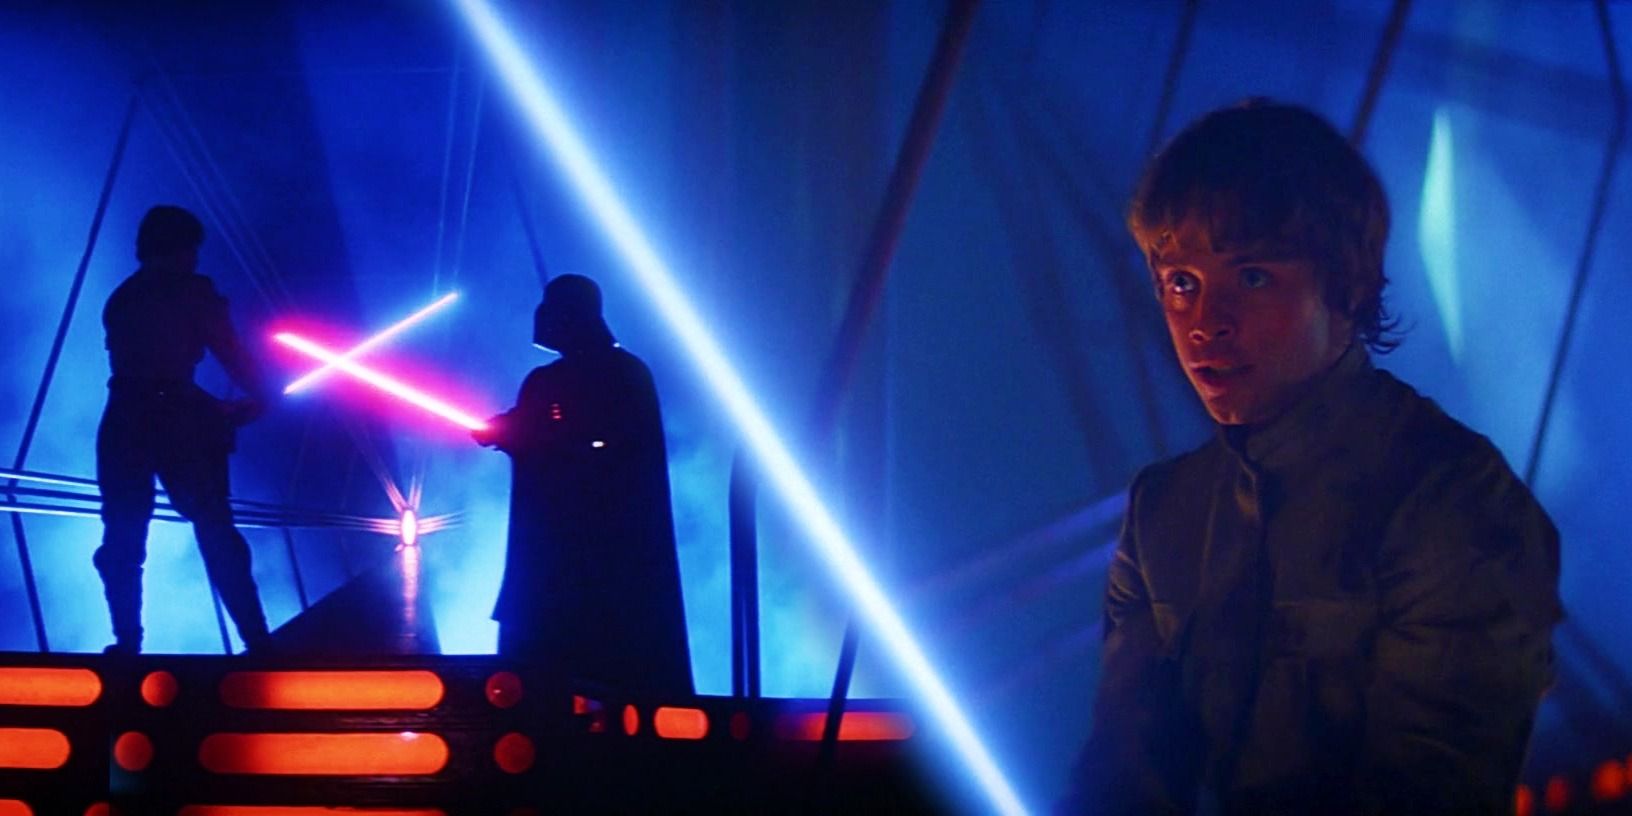 Luke and Vader fighting in The Empire Strikes Back to the left and Luke wielding his blue lightsaber to the right